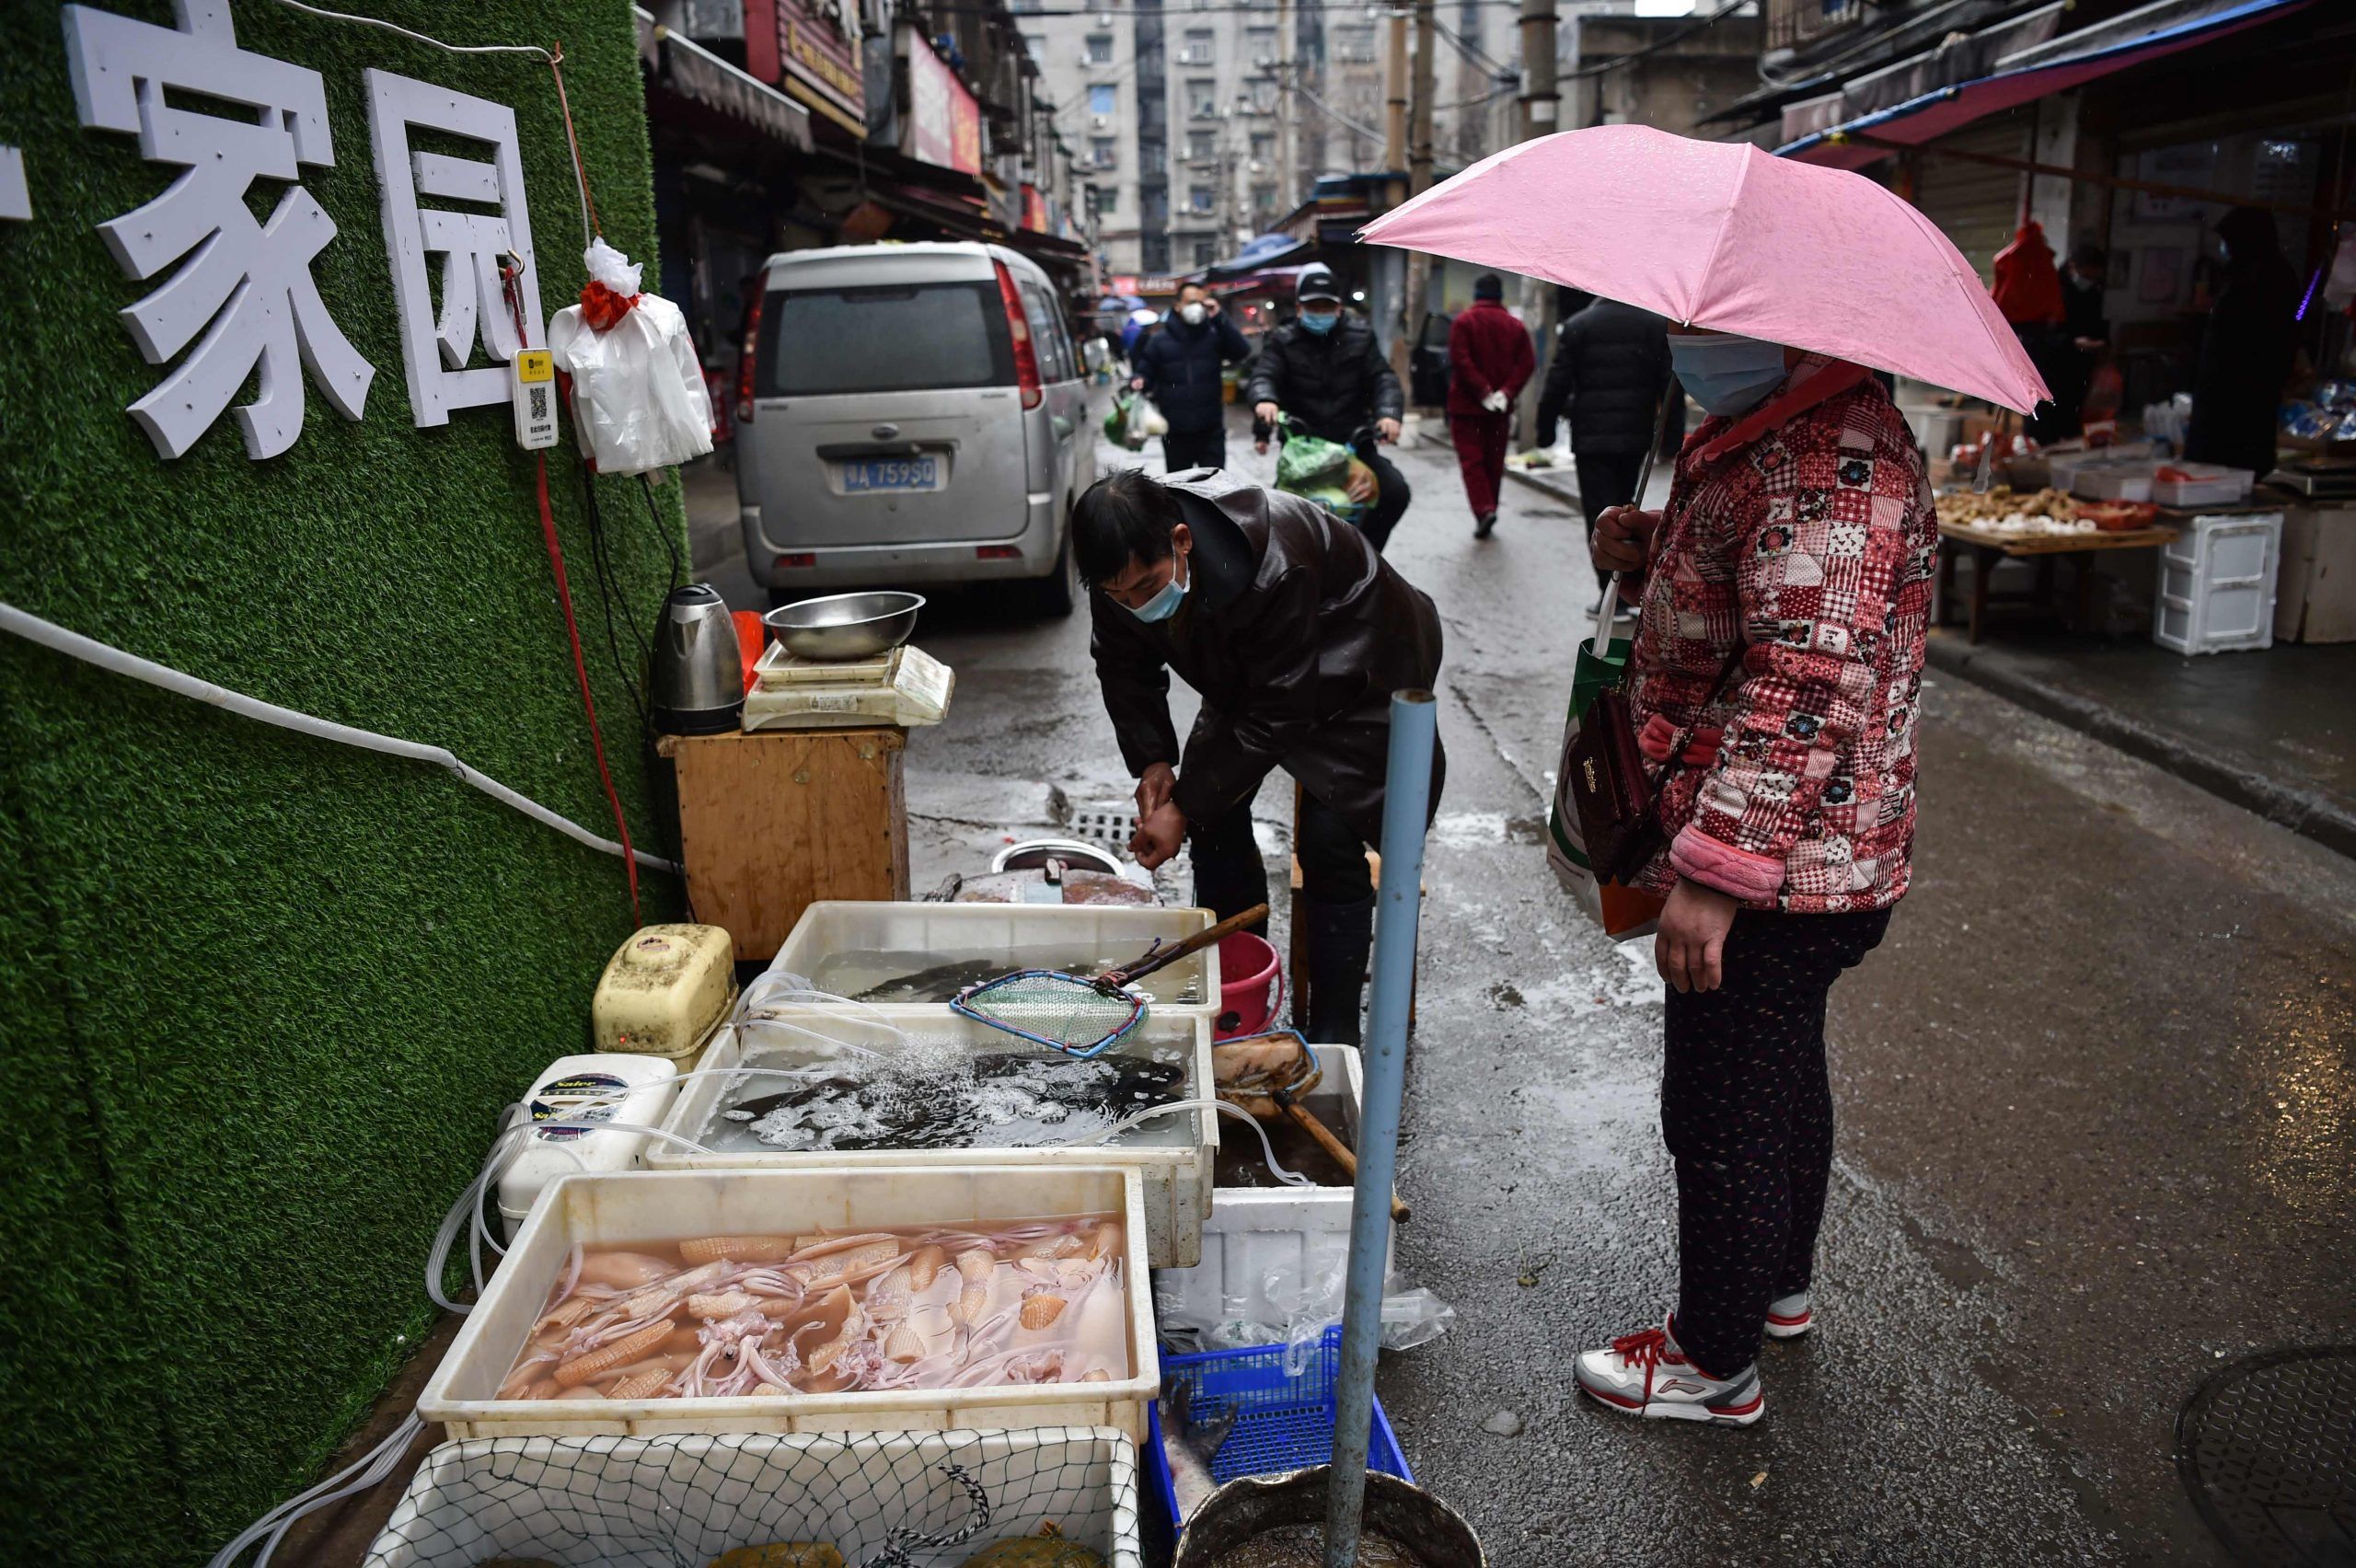 A masked vendor sells fish and turtles at a market in Wuhan where the coronavirus was discovered on January 24 2020. - The death toll in China's viral outbreak has risen to 25, with the number of confirmed cases also leaping to 830, the national health commission said. (Photo by Hector RETAMAL / AFP) (Photo by HECTOR RETAMAL/AFP via Getty Images)